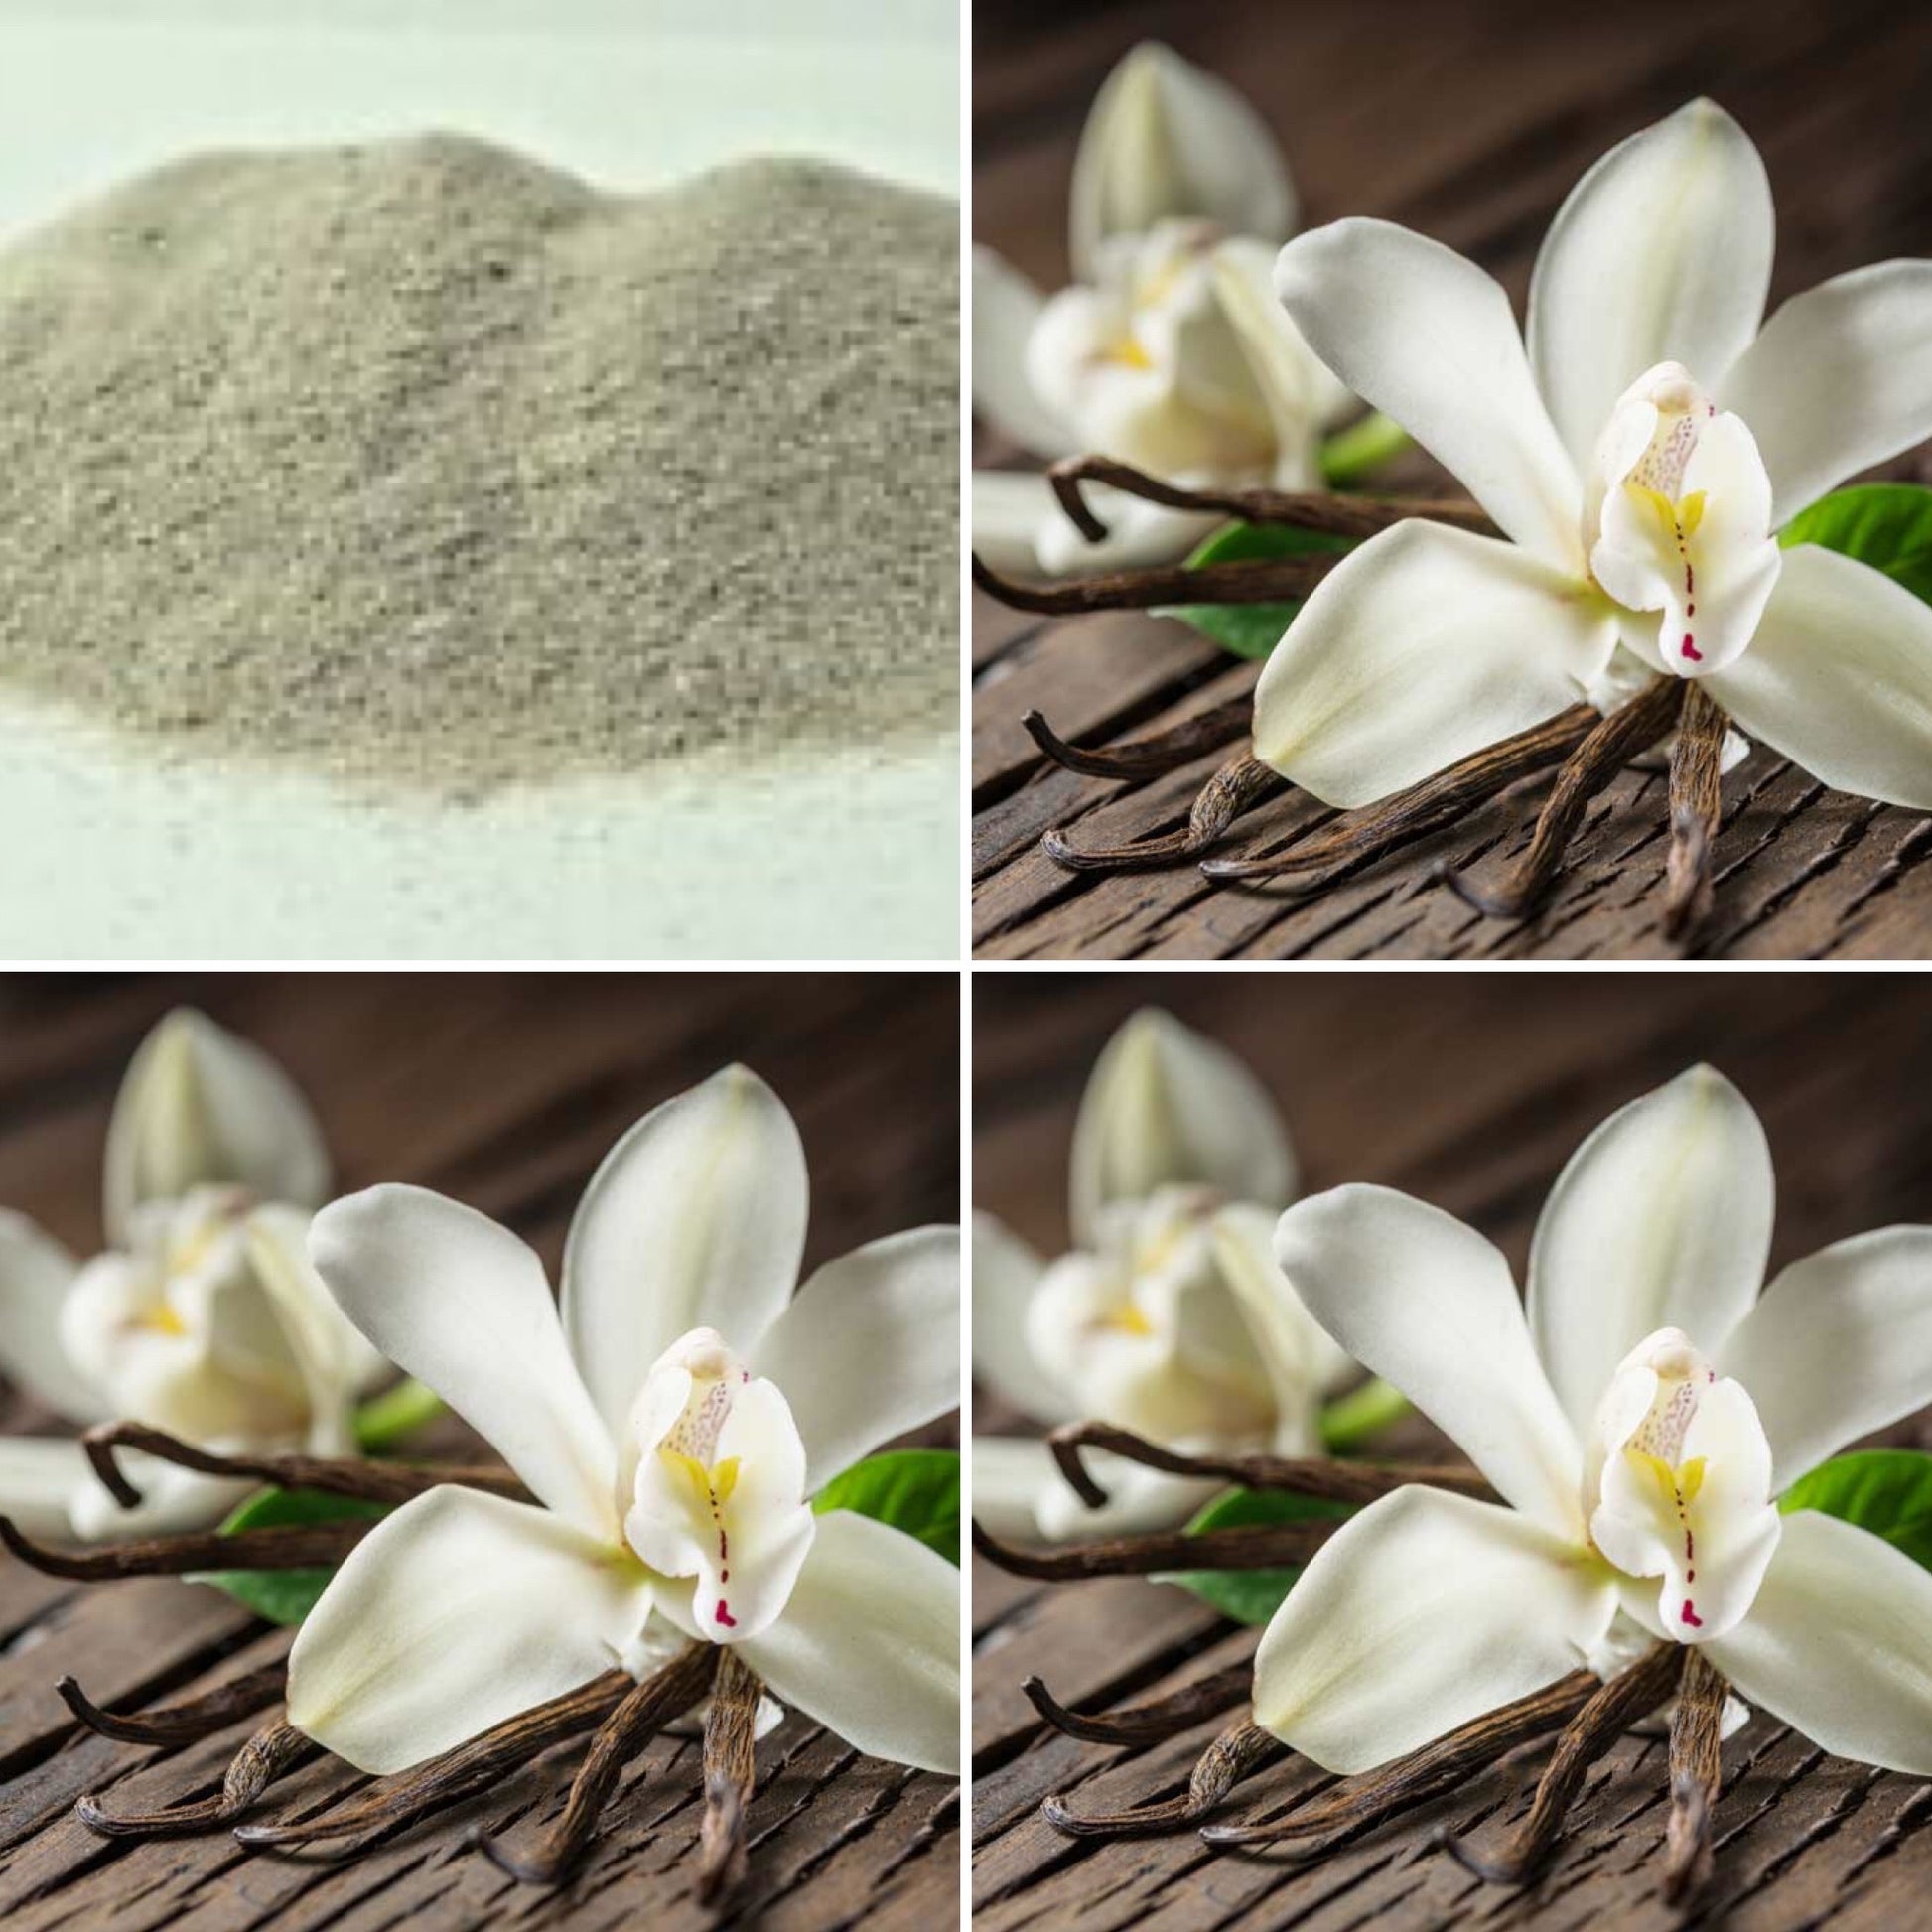 A pile of ground pumice and vanilla flowers, these ingredients are used in The Good Soap Vanilla Pumice Soap